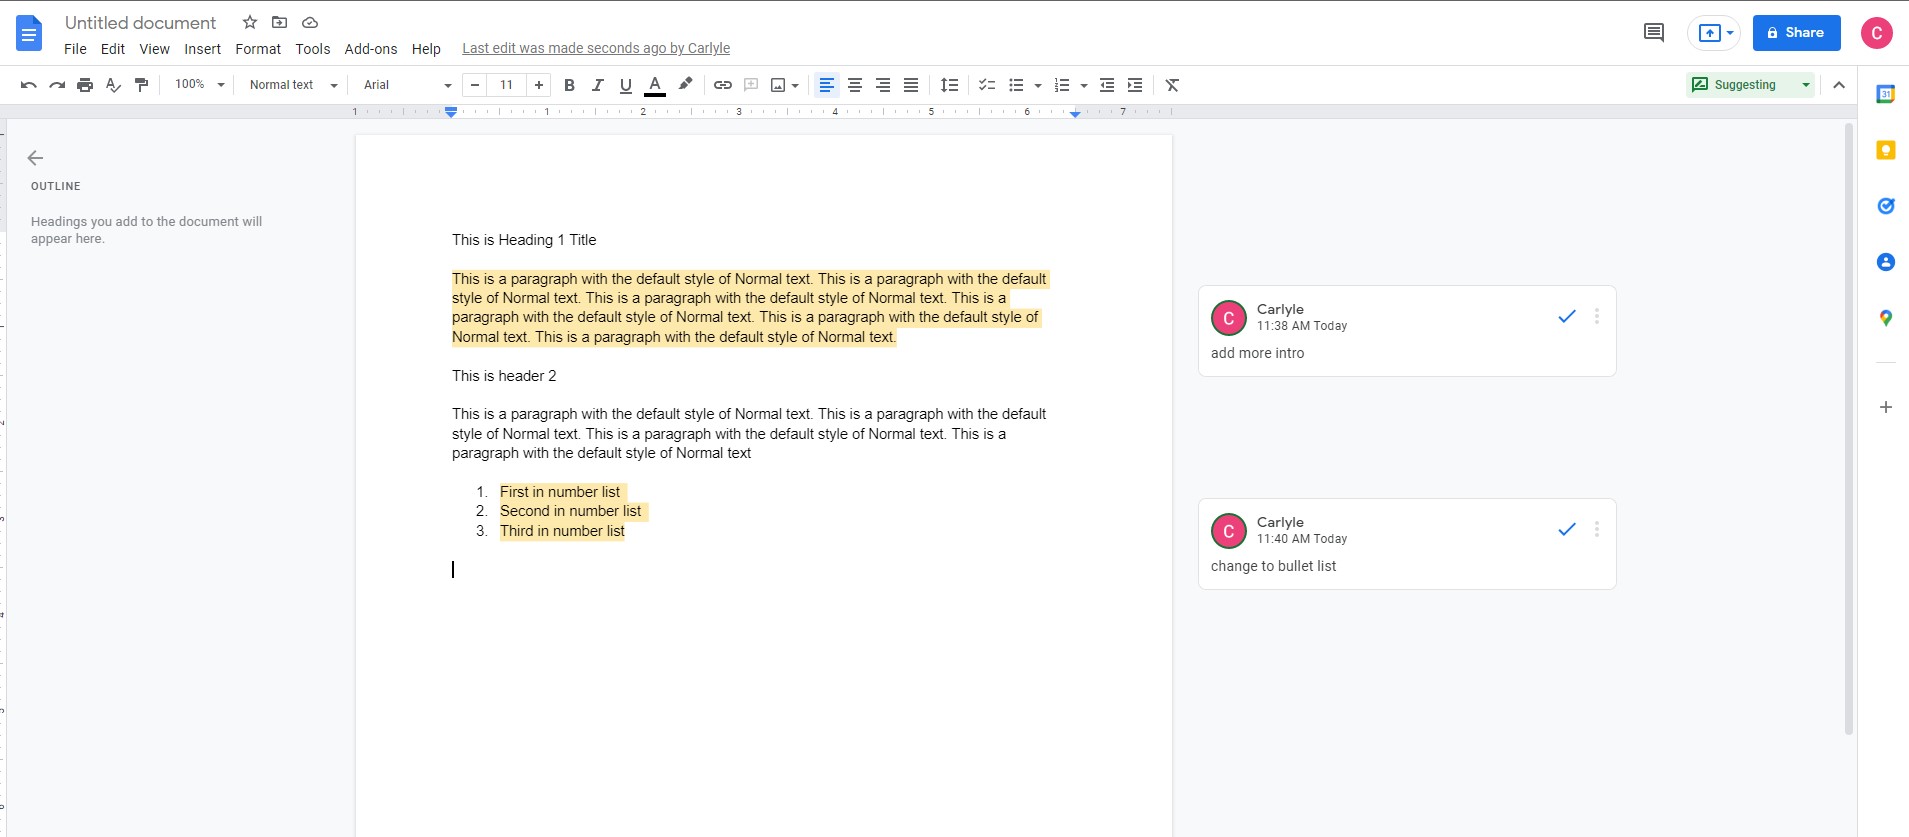 Step 2: Create a new Google Docs document and add comments or open one that already has comments. You can do this by going in the Google Docs.